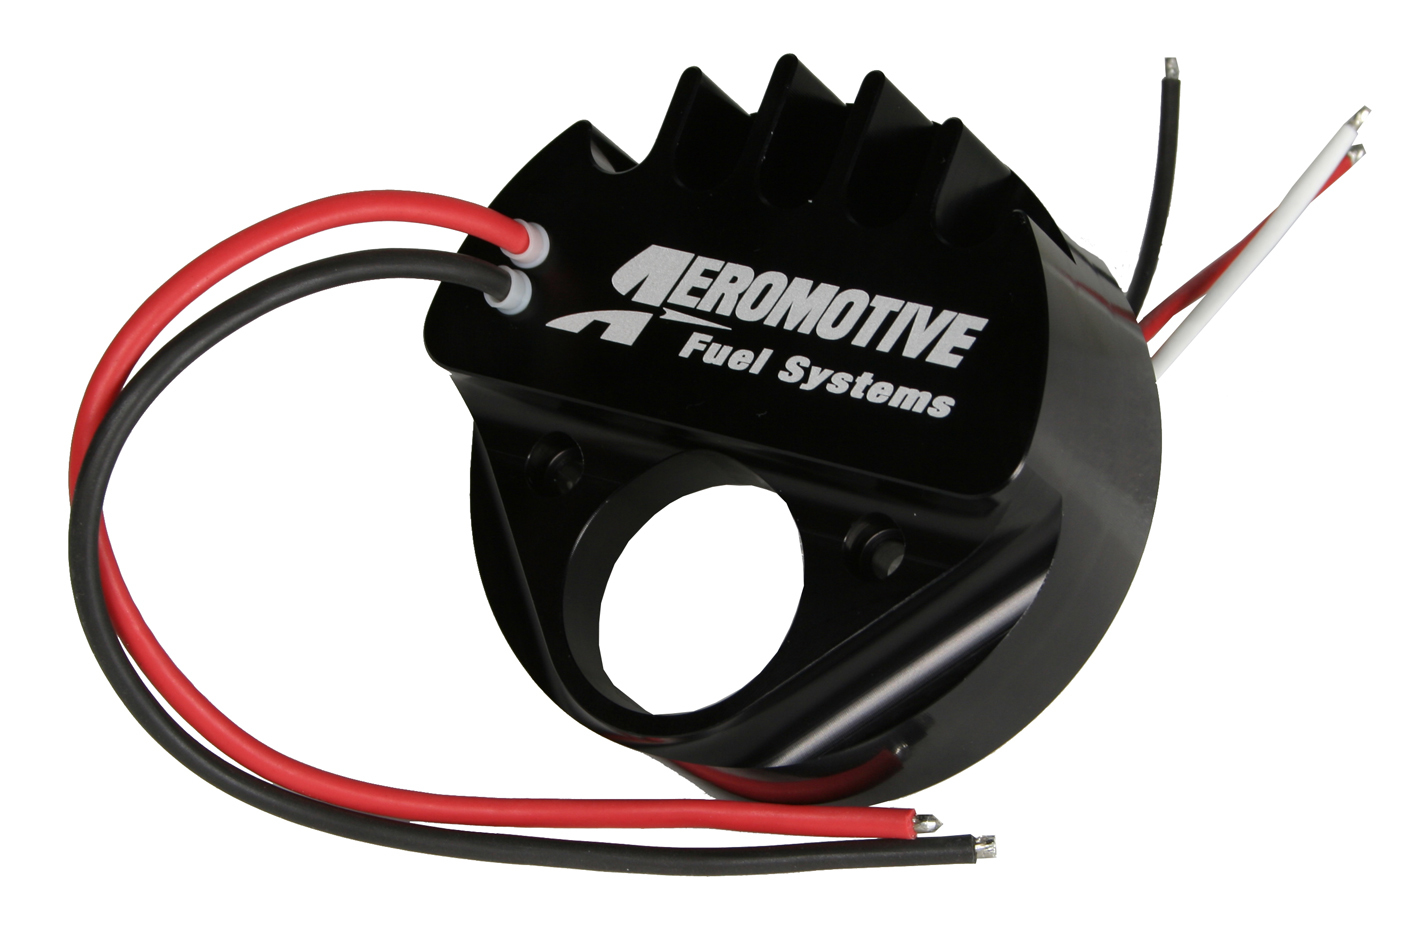 Aeromotive 18047 Fuel Pump, Pro-Series 5.0, Electric, Variable Speed, In-Tank, 1850 lb/hr at 9 psi, 12 AN Female O-Ring Inlet, 10 AN Female O-Ring Outlet, Speed Controller Included, Black, E85 / Gas, Each